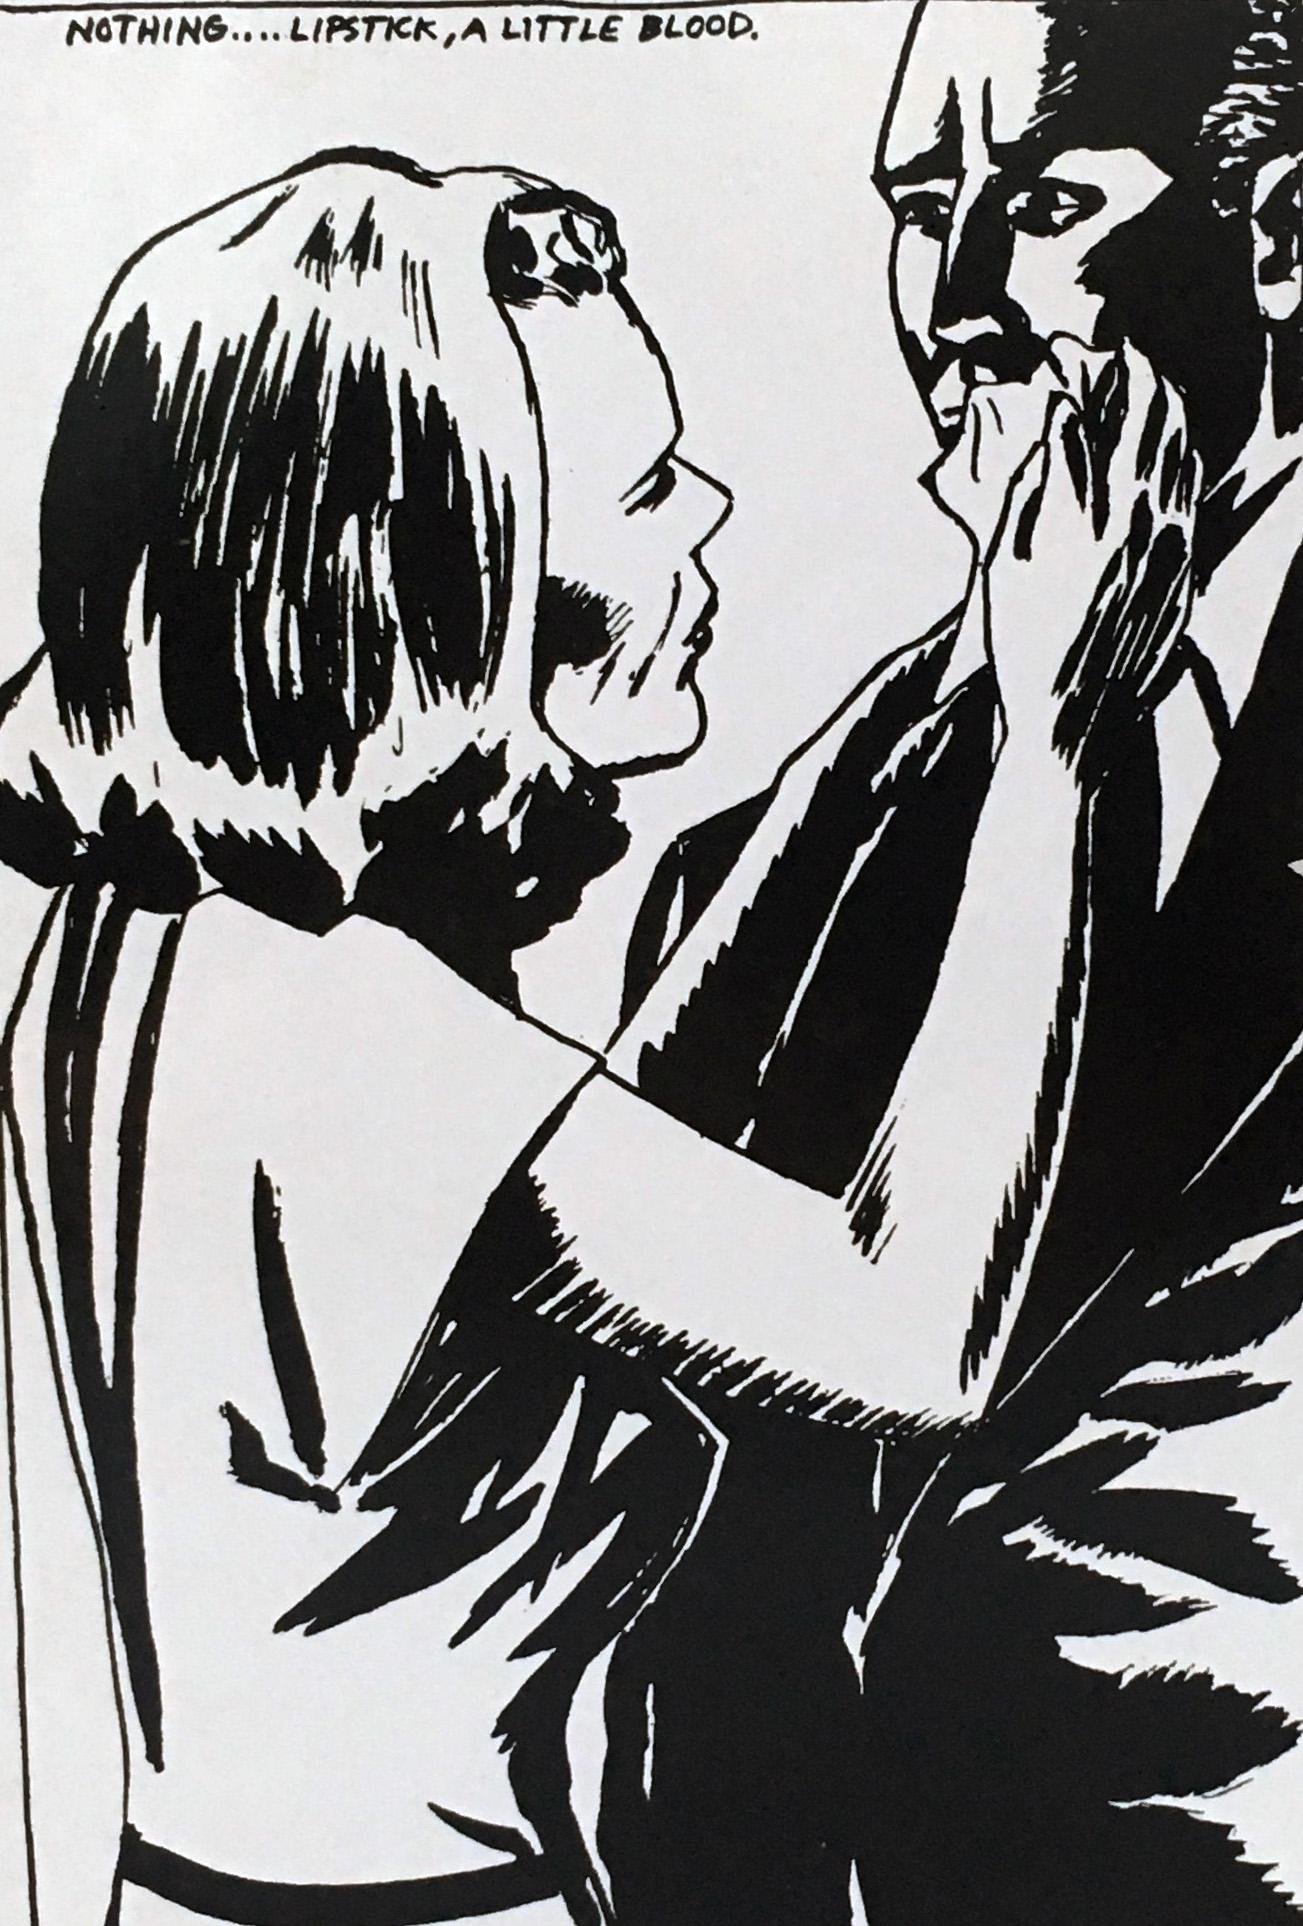 Raymond Pettibon Off-Set Record Cover Art
Sonic Youth Goo; original European 1st Pressing, 1990

The most iconic of all Pettibon music-related images, as well as one of the most celebrated record covers of all time, the cover is a off-set